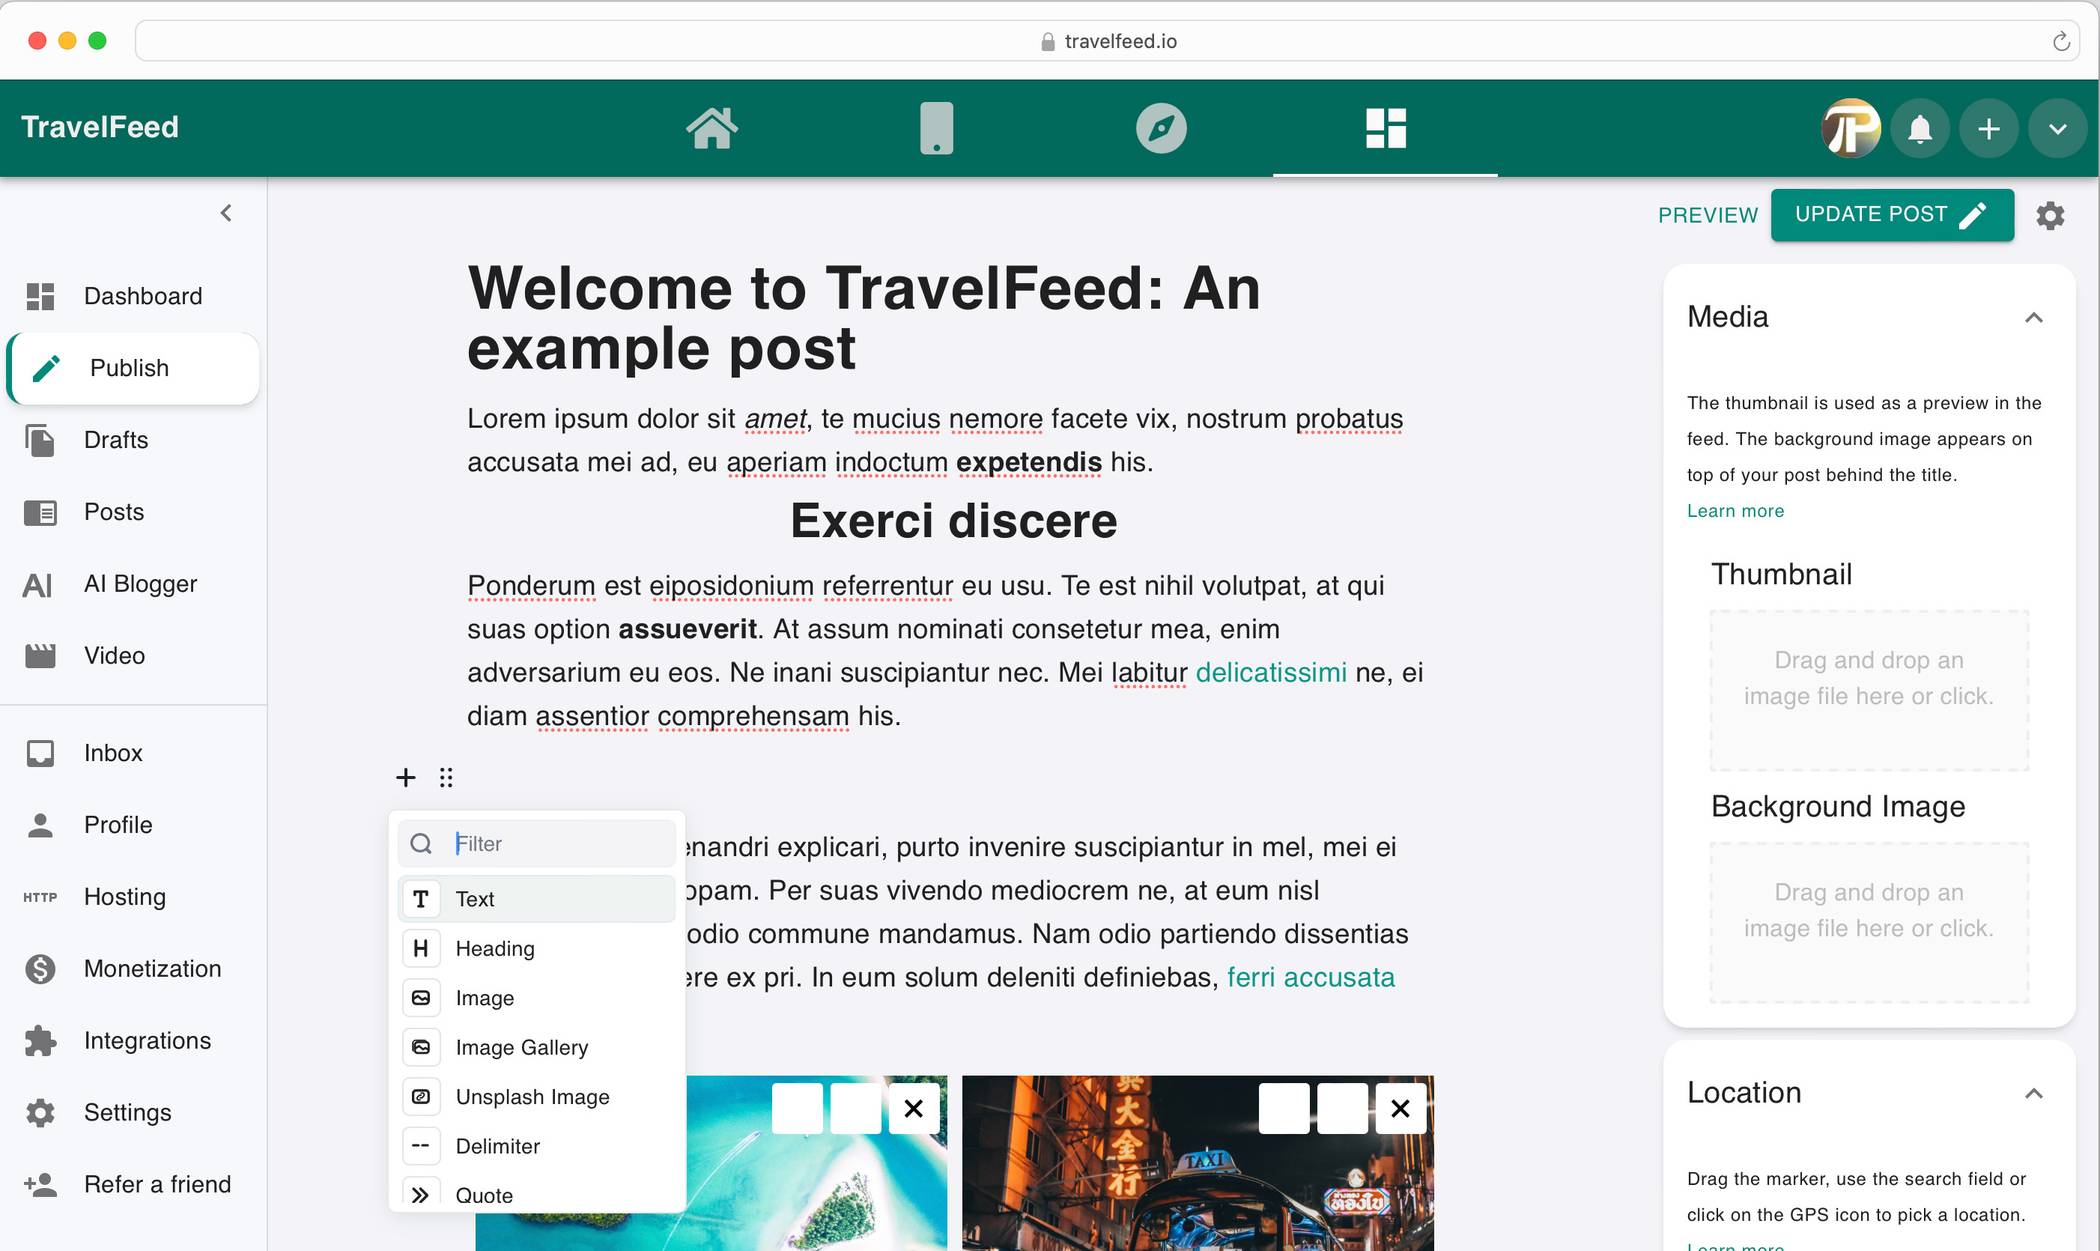 Writing a travel blog for friends and family is easy with TravelFeed’s block-based editor